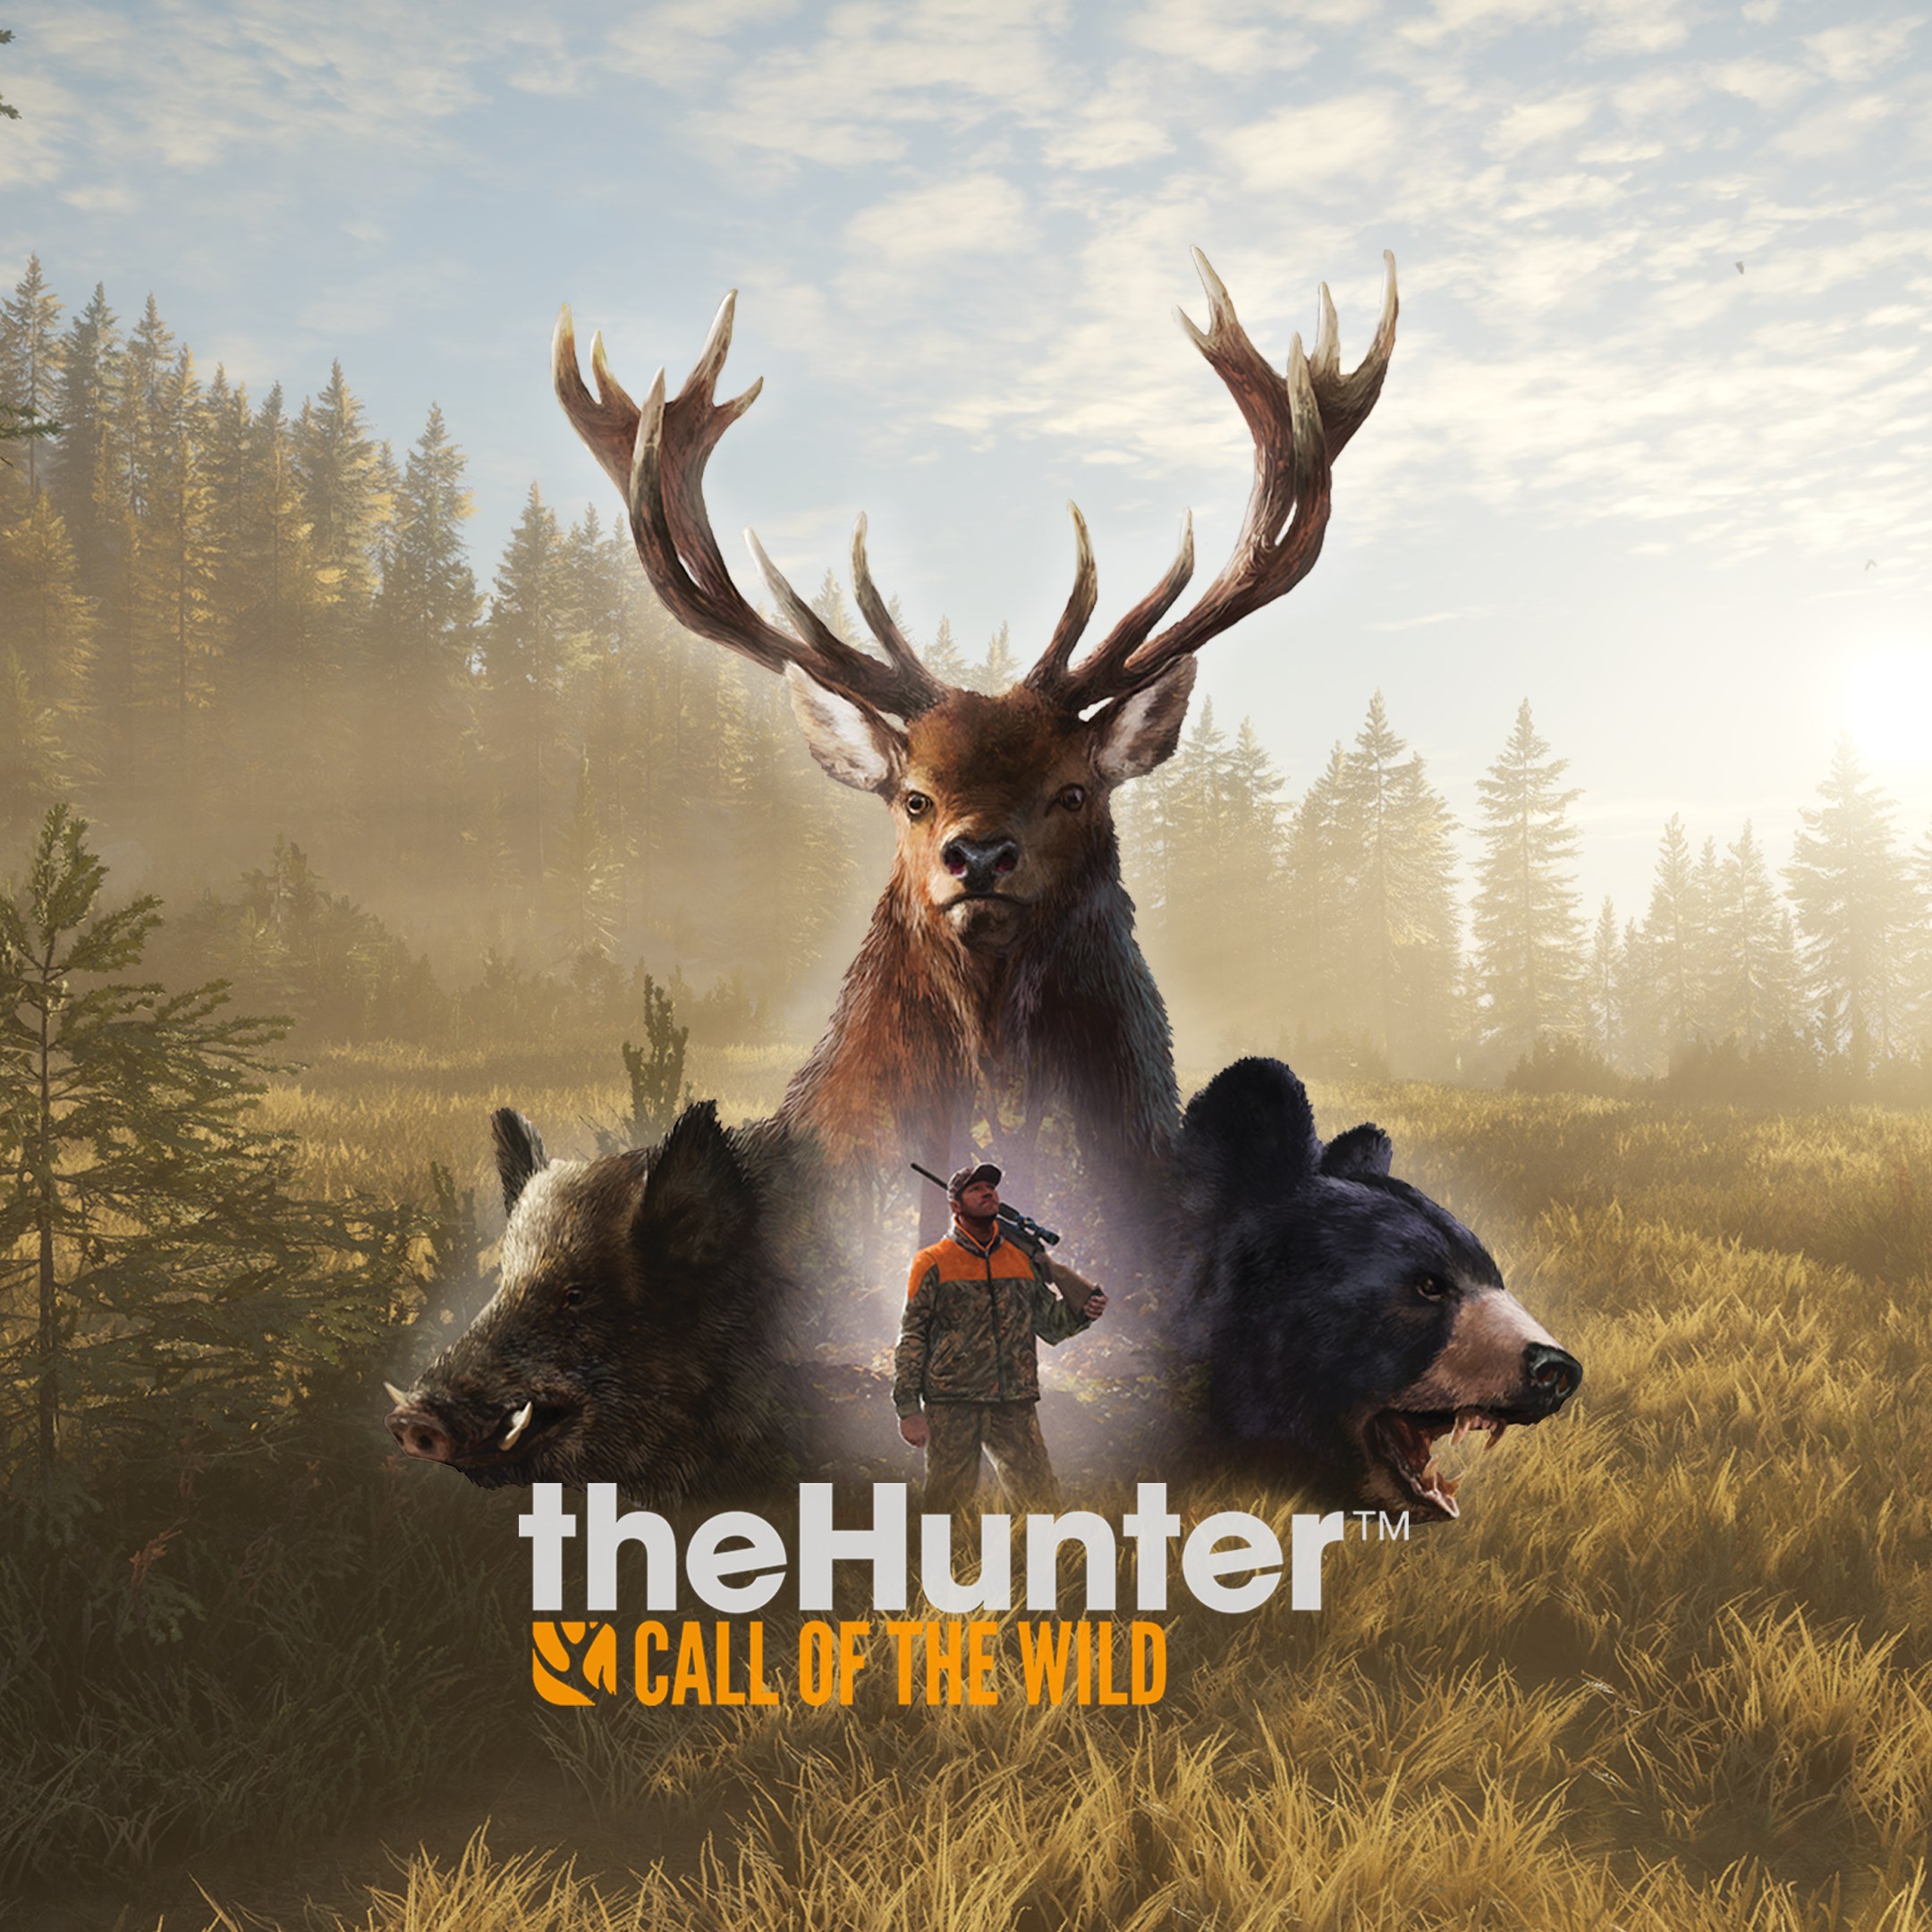 Call of the wild epic games. Игра the Hunter Call of the Wild. Игра охота the Hunter Call of the Wild. The Hunter Call of the Wild обложка. The Hunter Call of the Wild ПС 4.